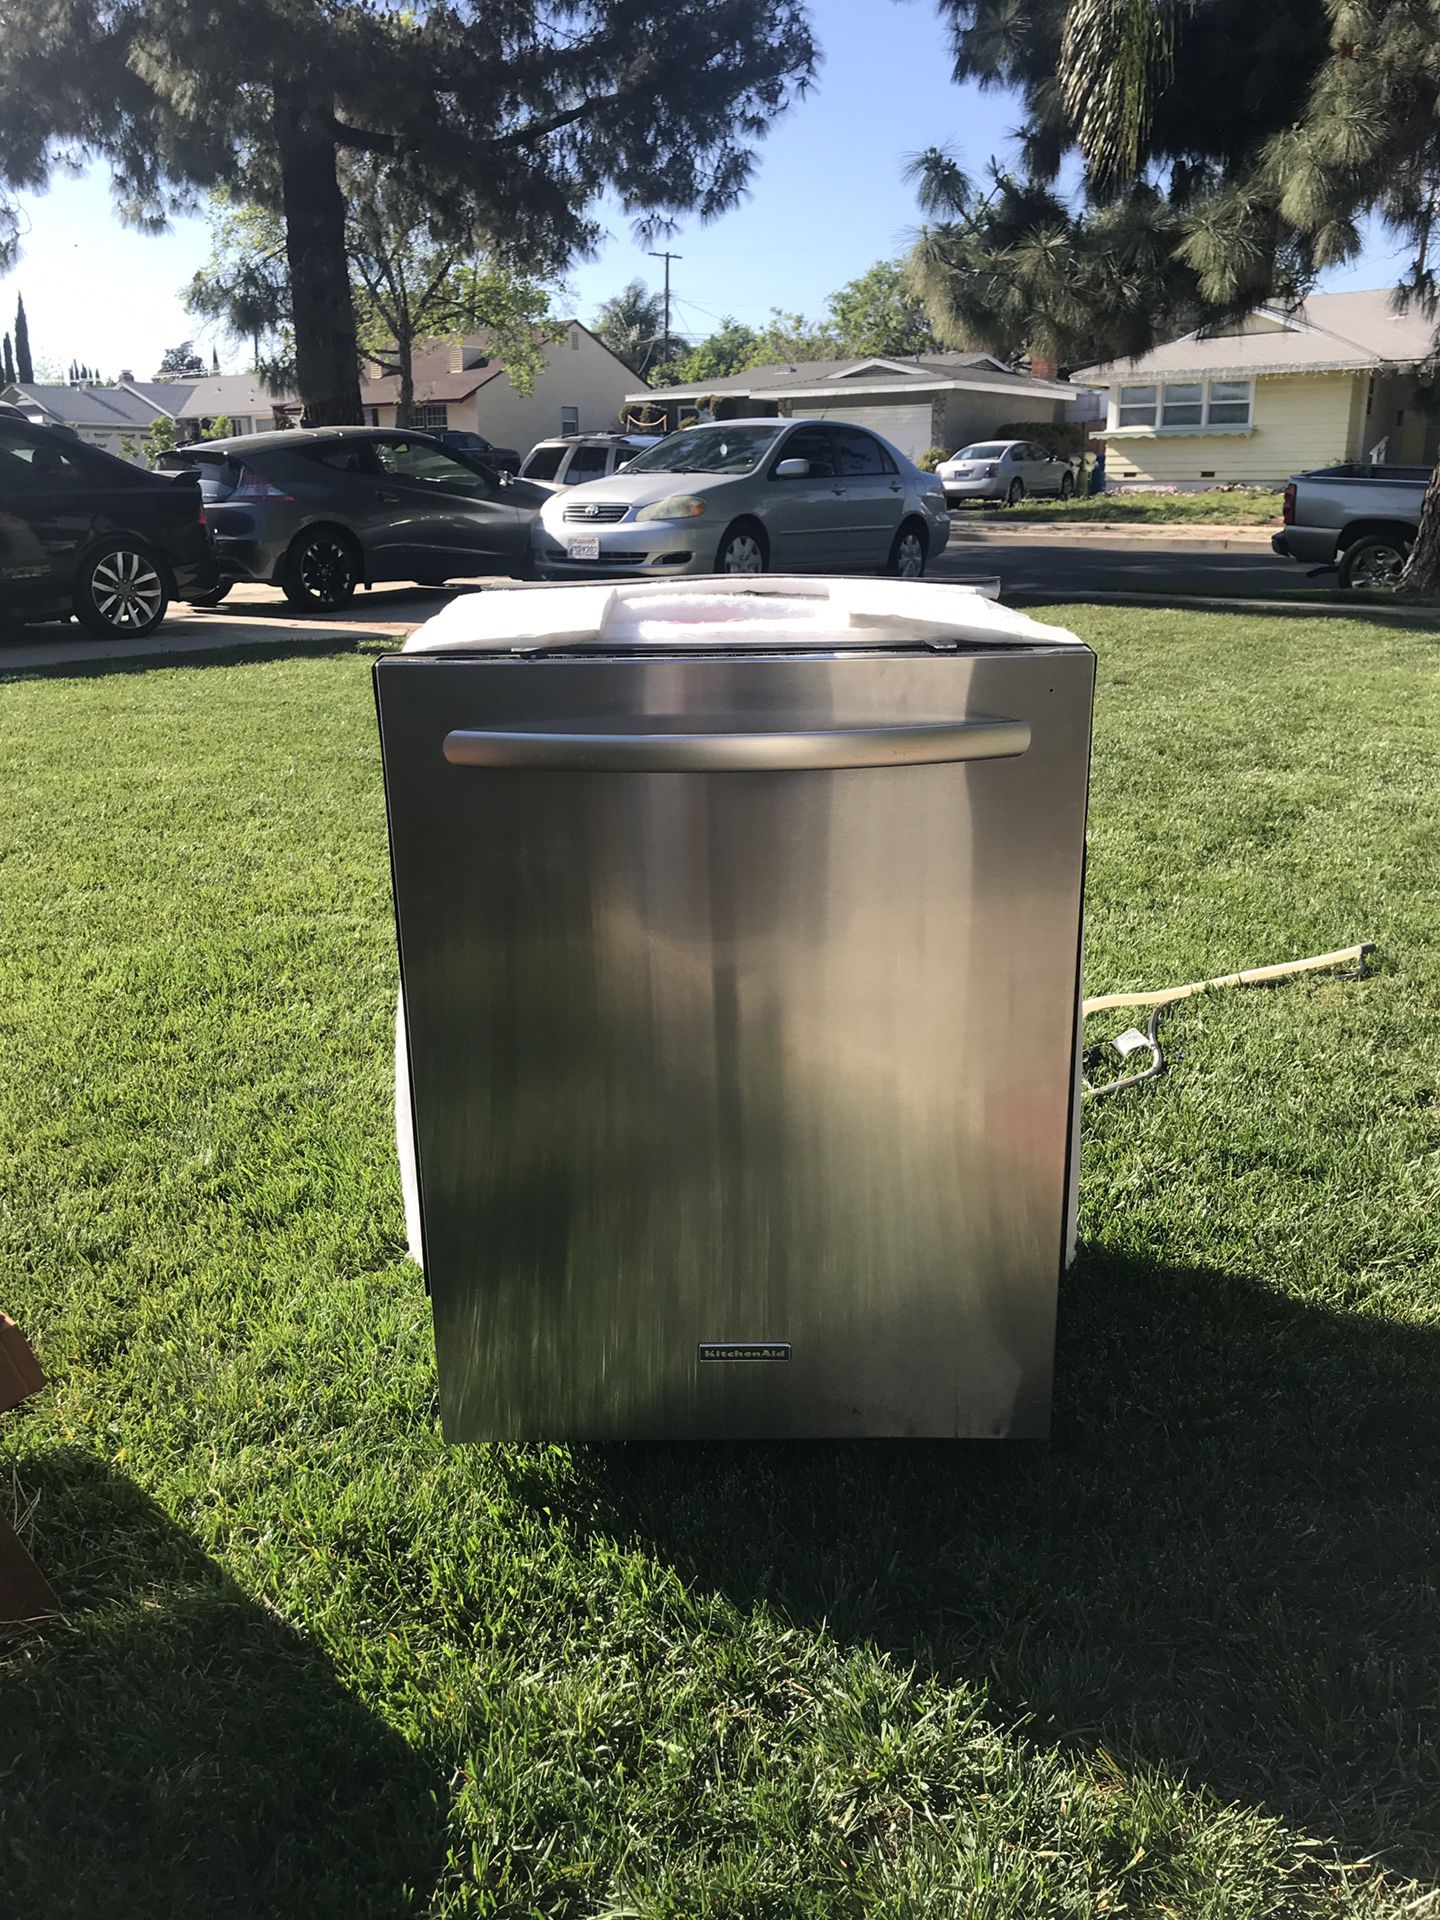 Dish Washer - ( Kitchen Aid ) like new, has a little scratch on handle and it wear and tear...measurements- 24 x 34 (10 months old)